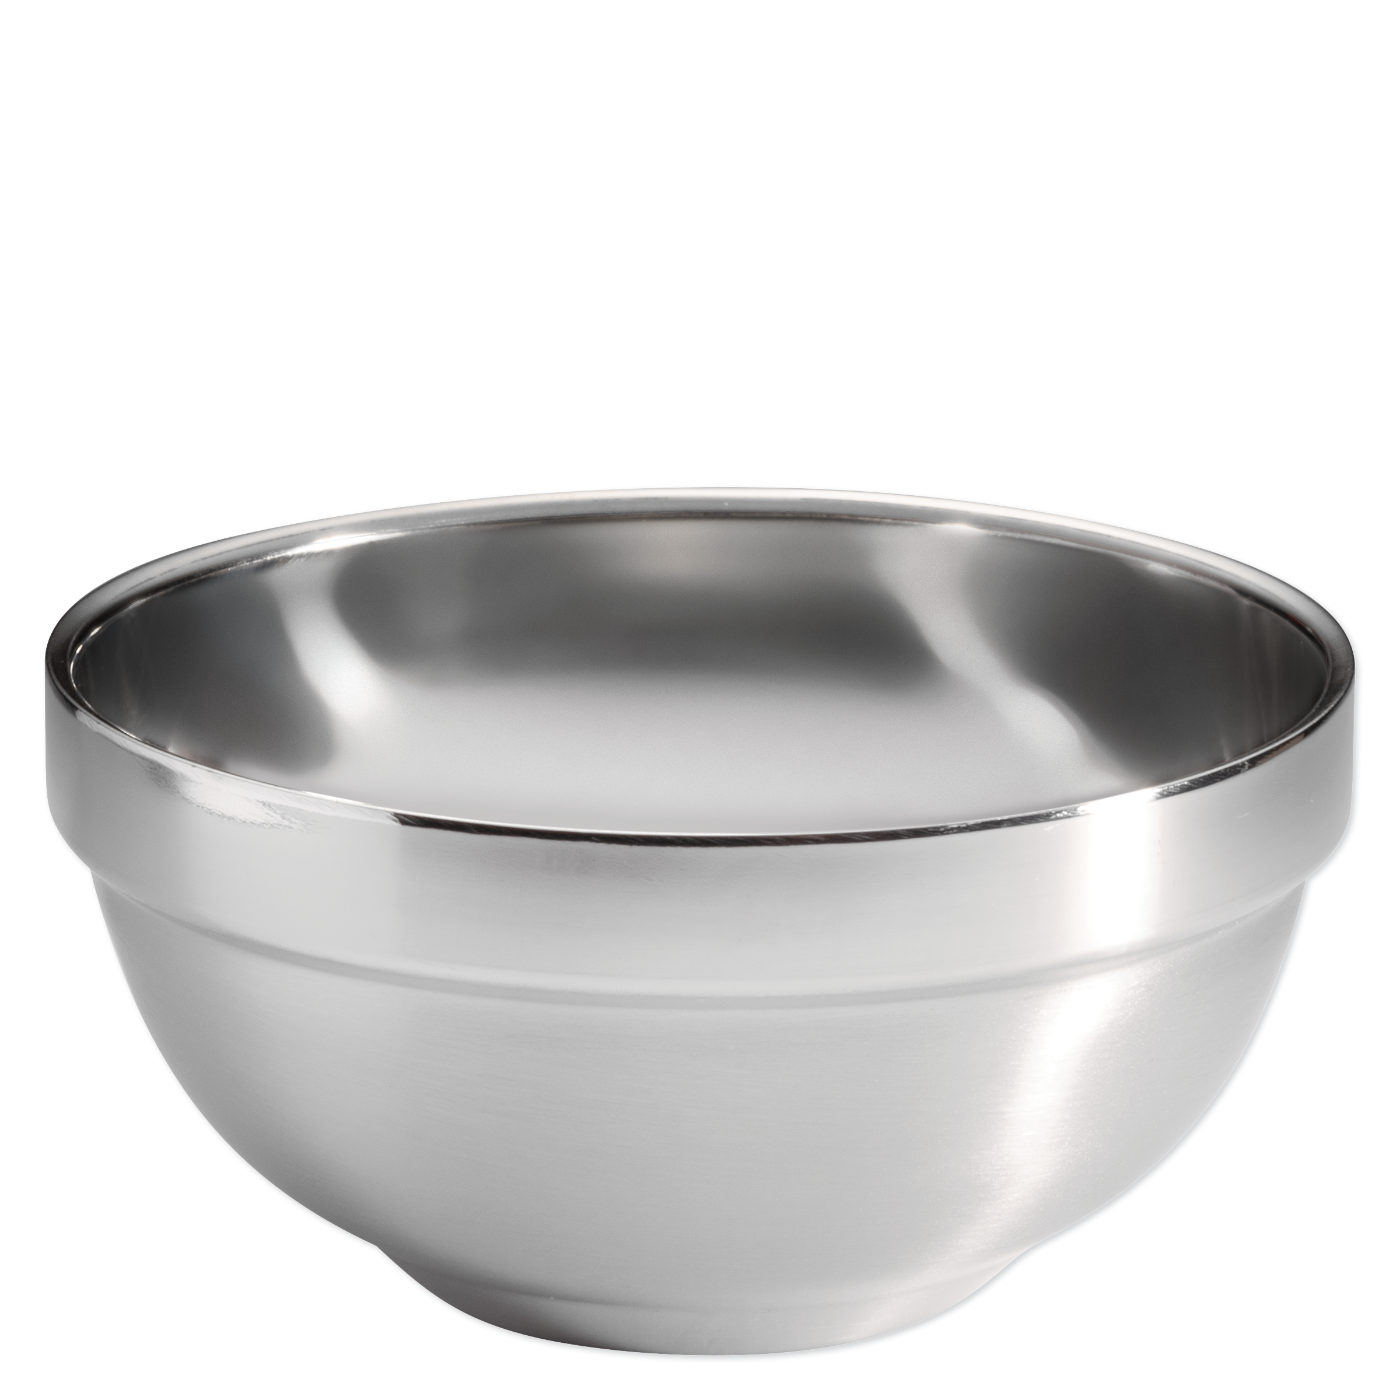 Stainless Steel Mixing Bowl - Small